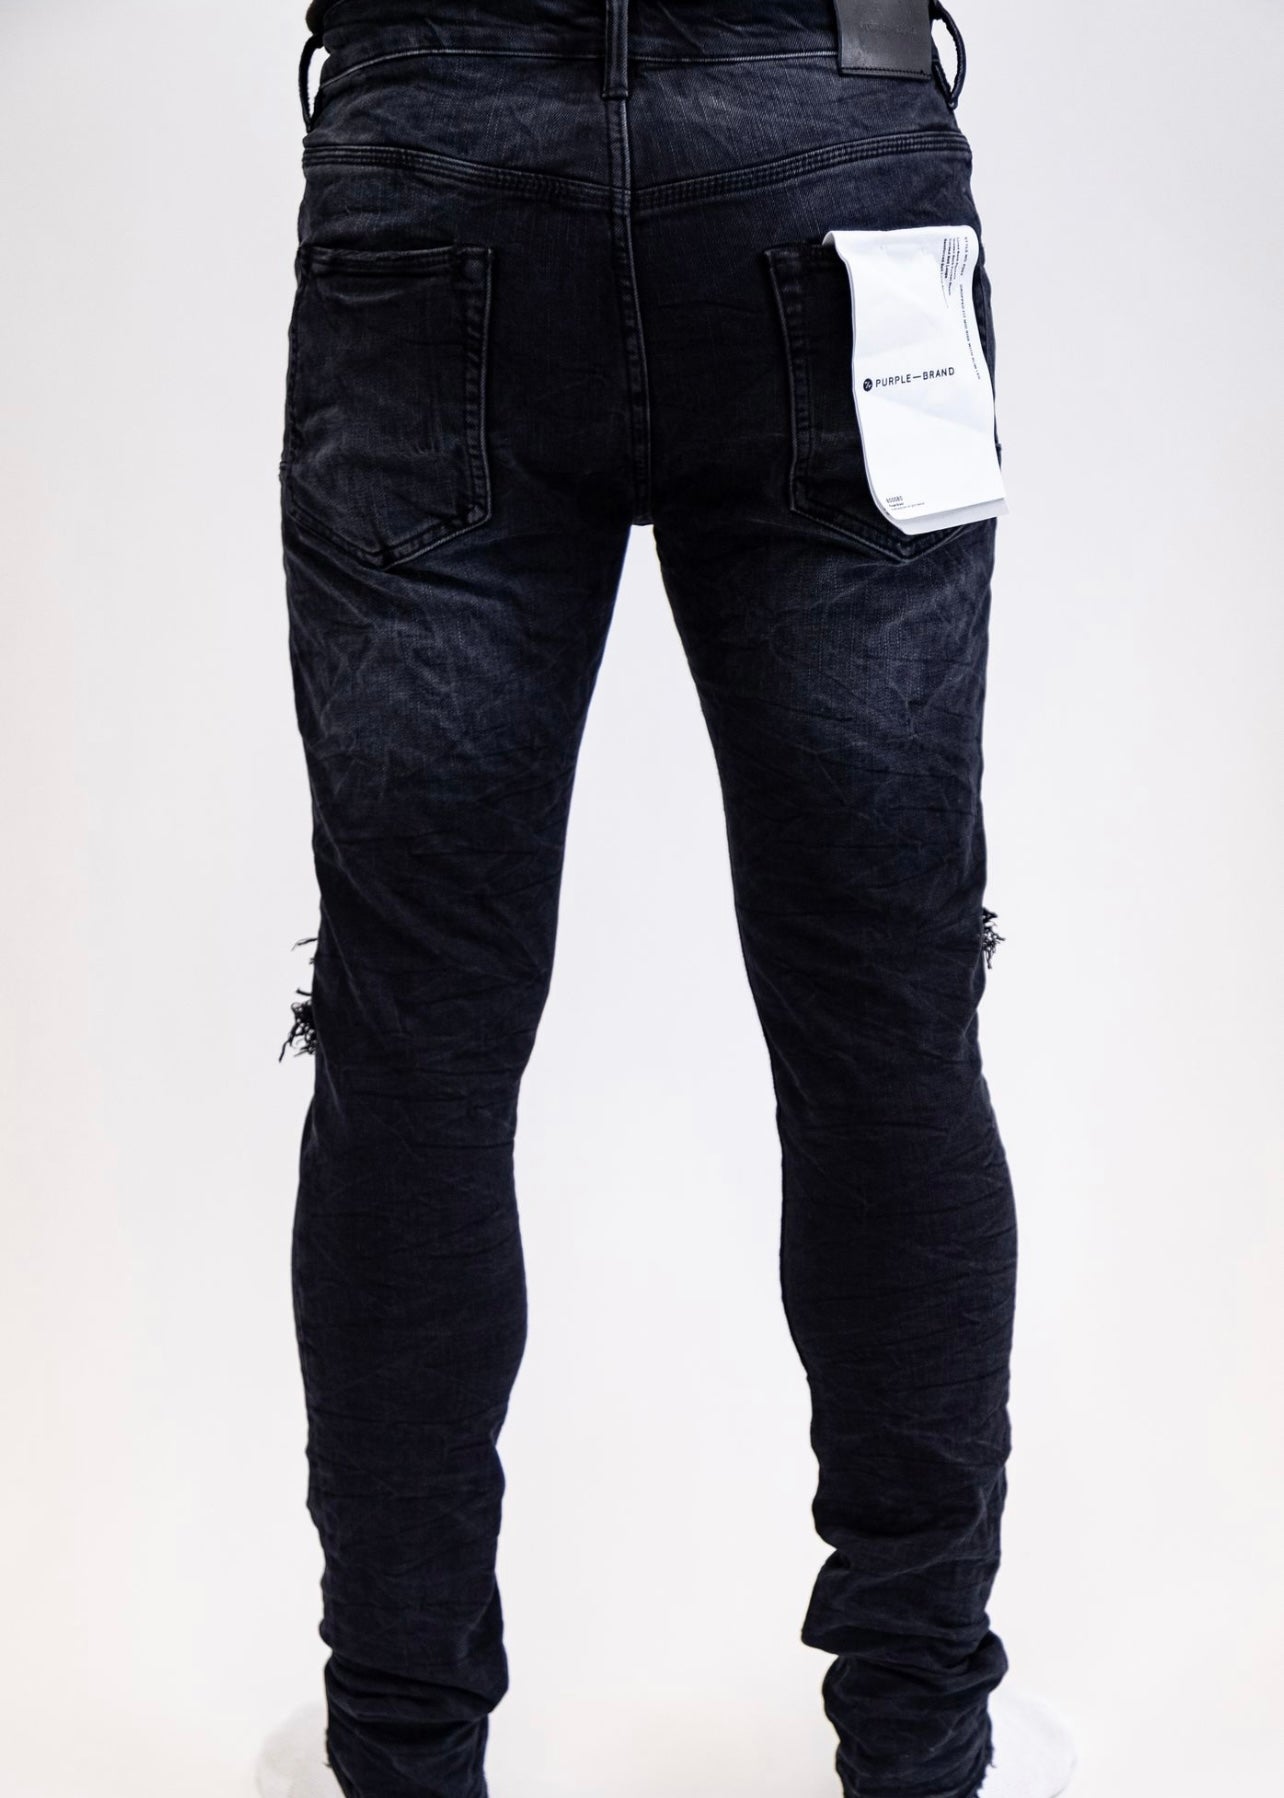 Purple brand jeans (black)- size 32-discounted price of $100